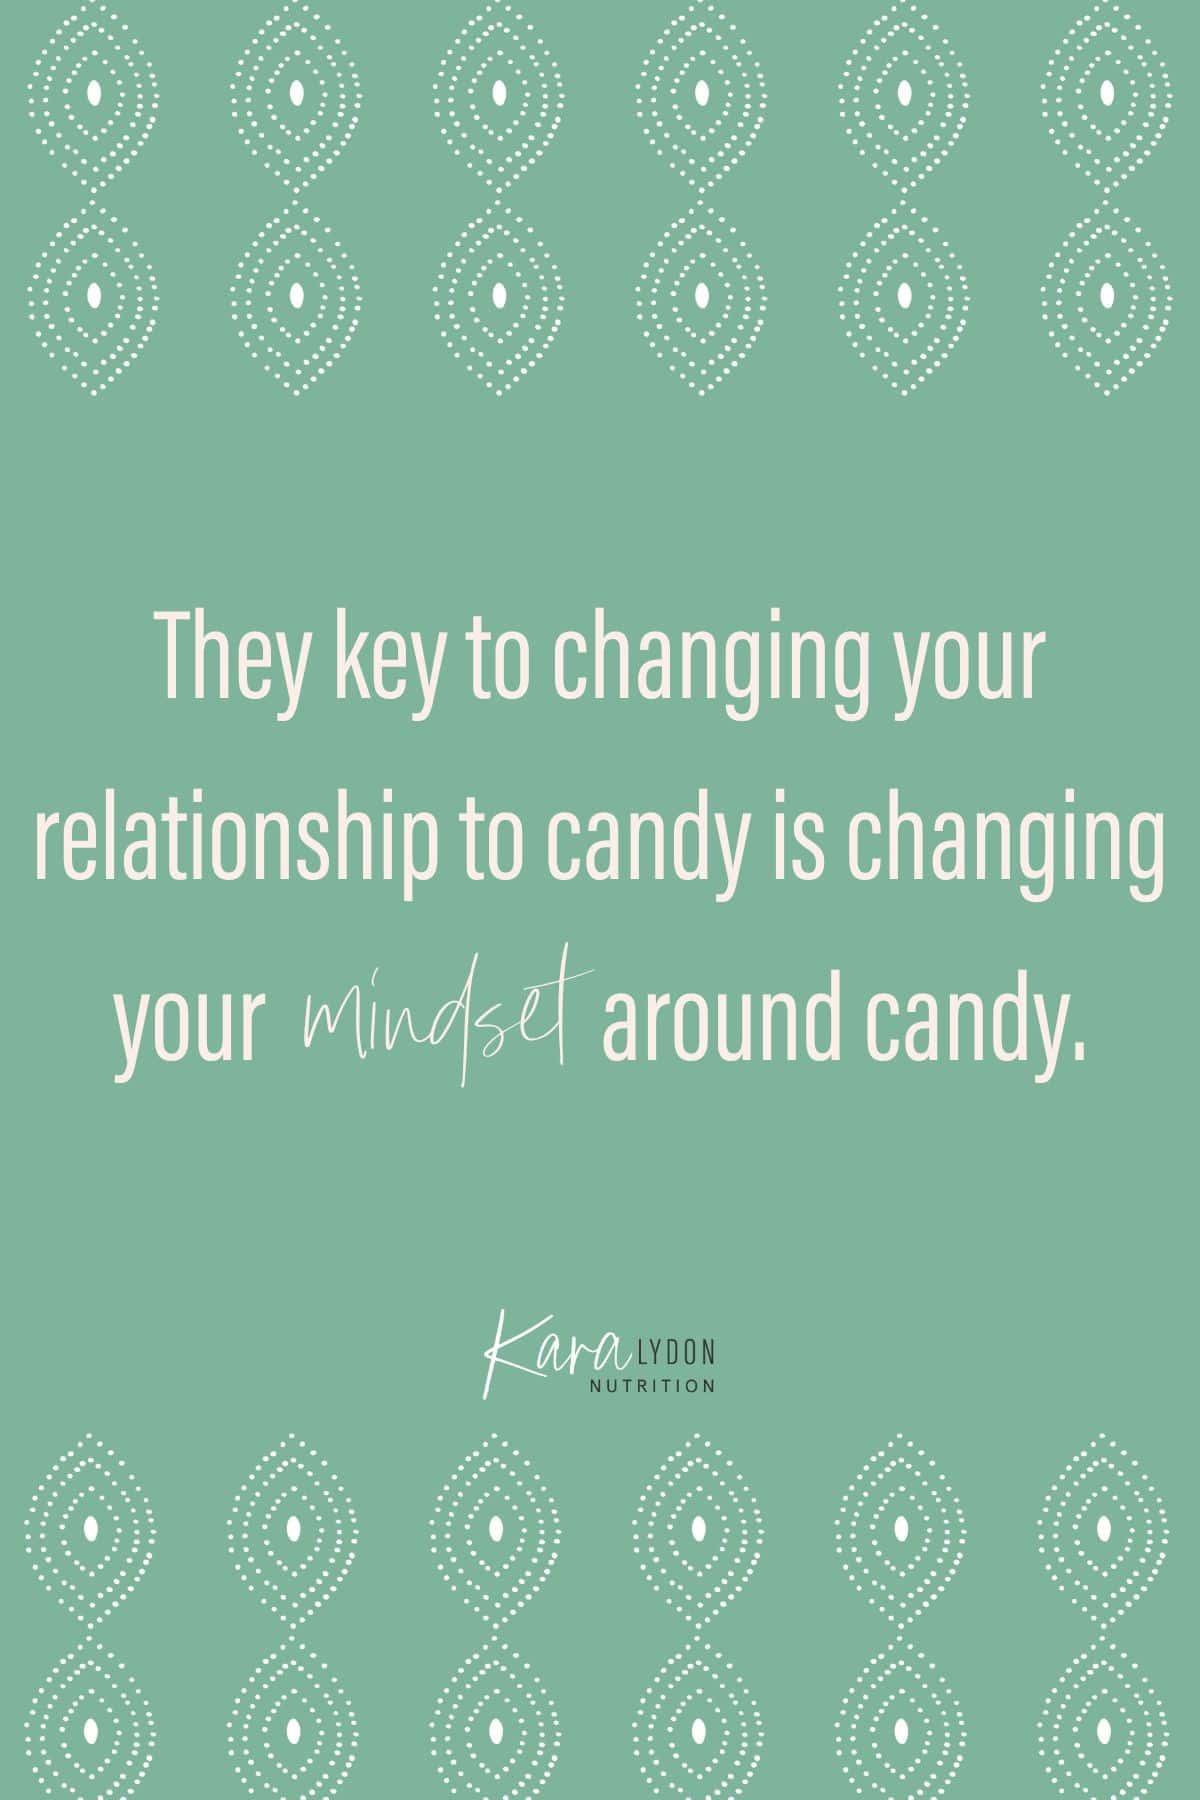 Graphic with quote: "The key to changing your relationship with sweets is to change the way you think about sweets."